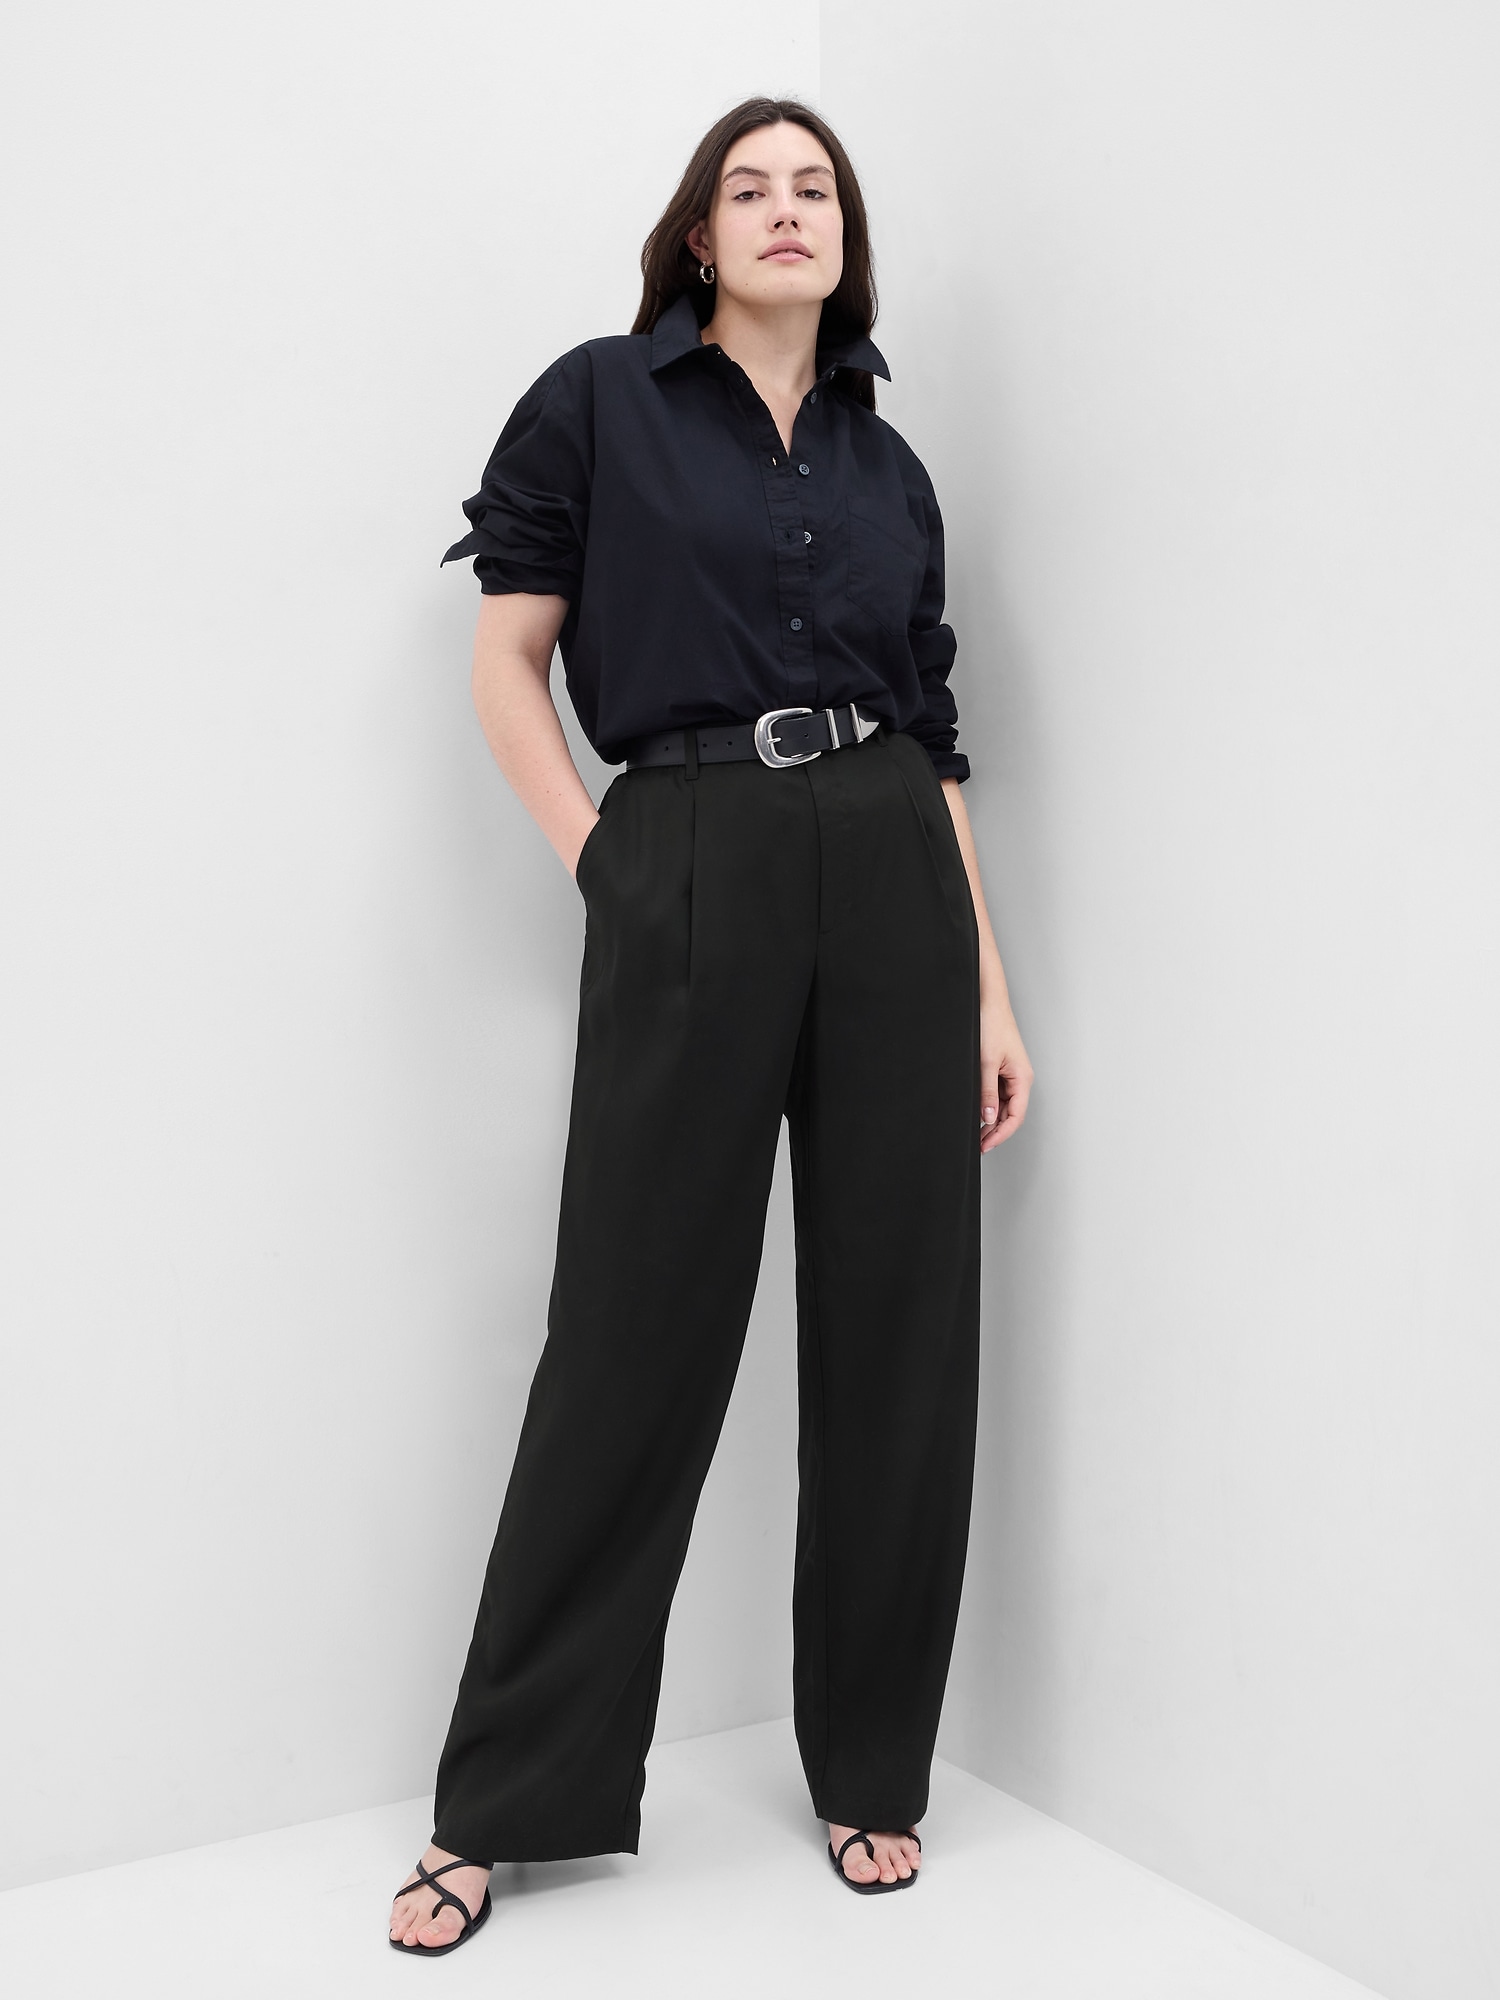 BOSS - Regular-rise pleated trousers in soft silk